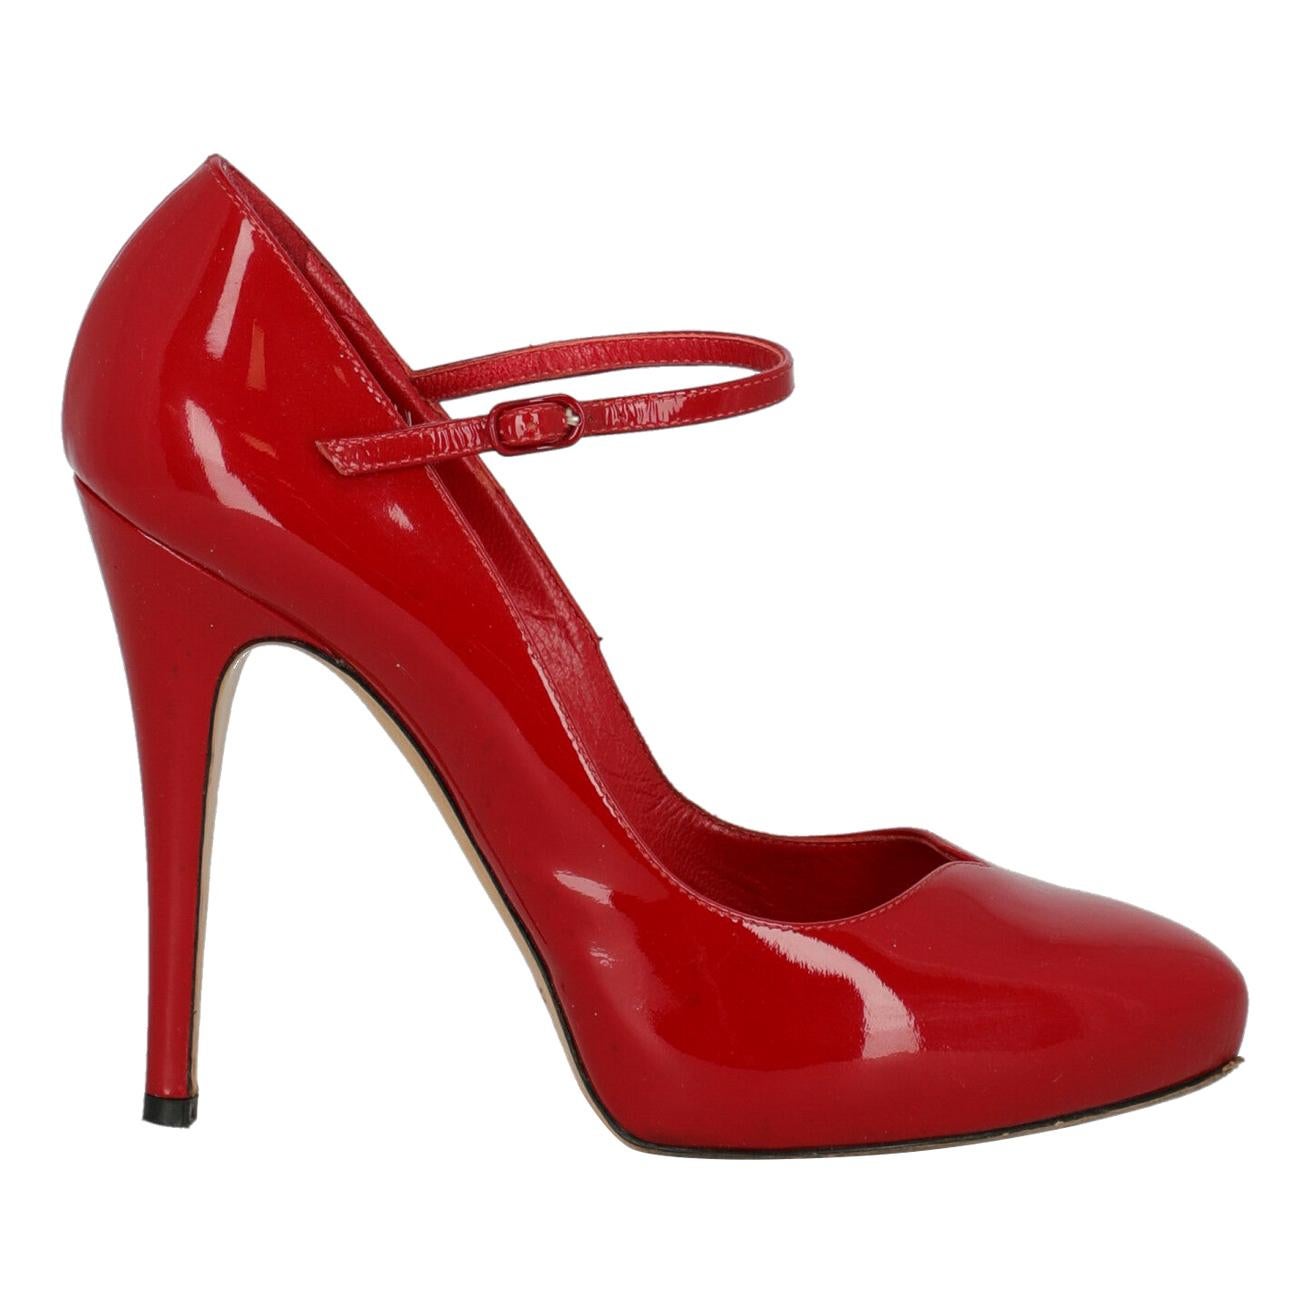 Casadei Woman Pumps Red Leather IT 36 For Sale